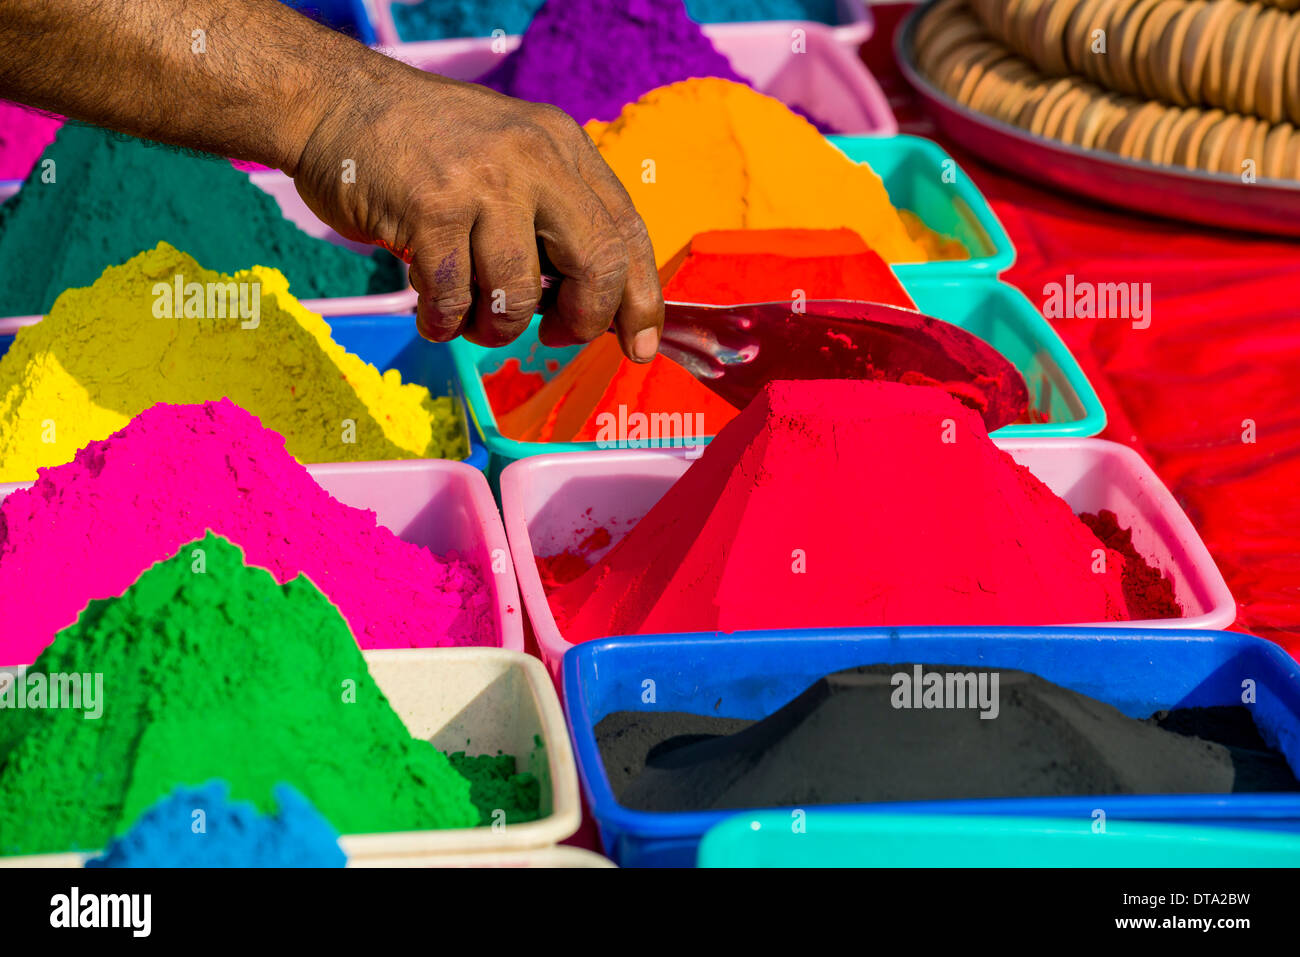 Colour powder in different colors is displayed in heaps for sale, Mumbai, Maharashtra, India Stock Photo